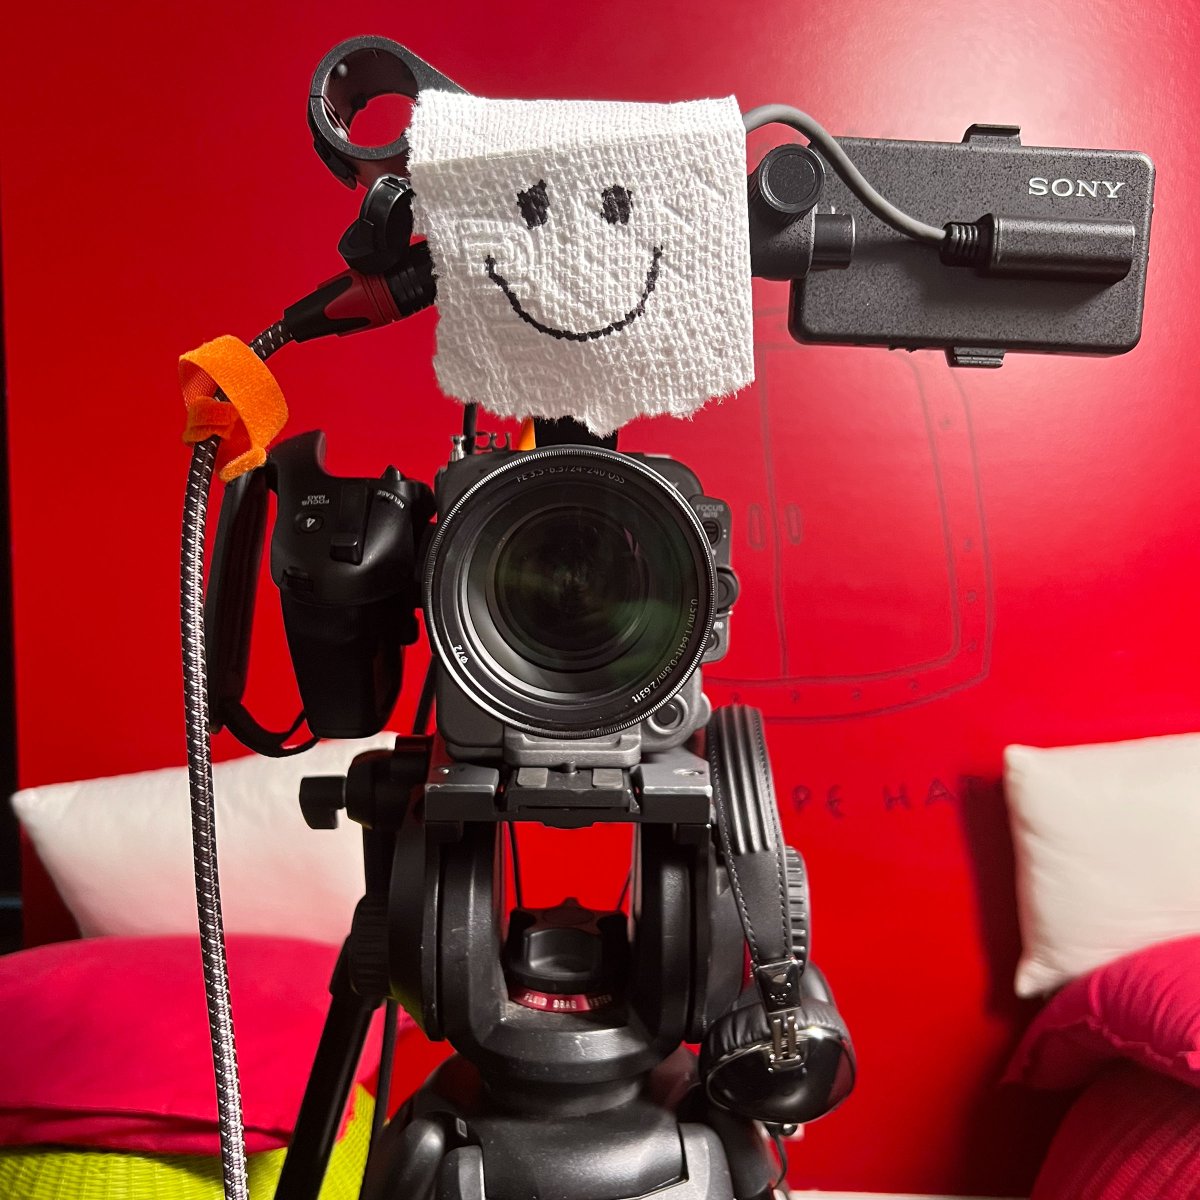 EDUCO Photo Services - Smile at the Camera